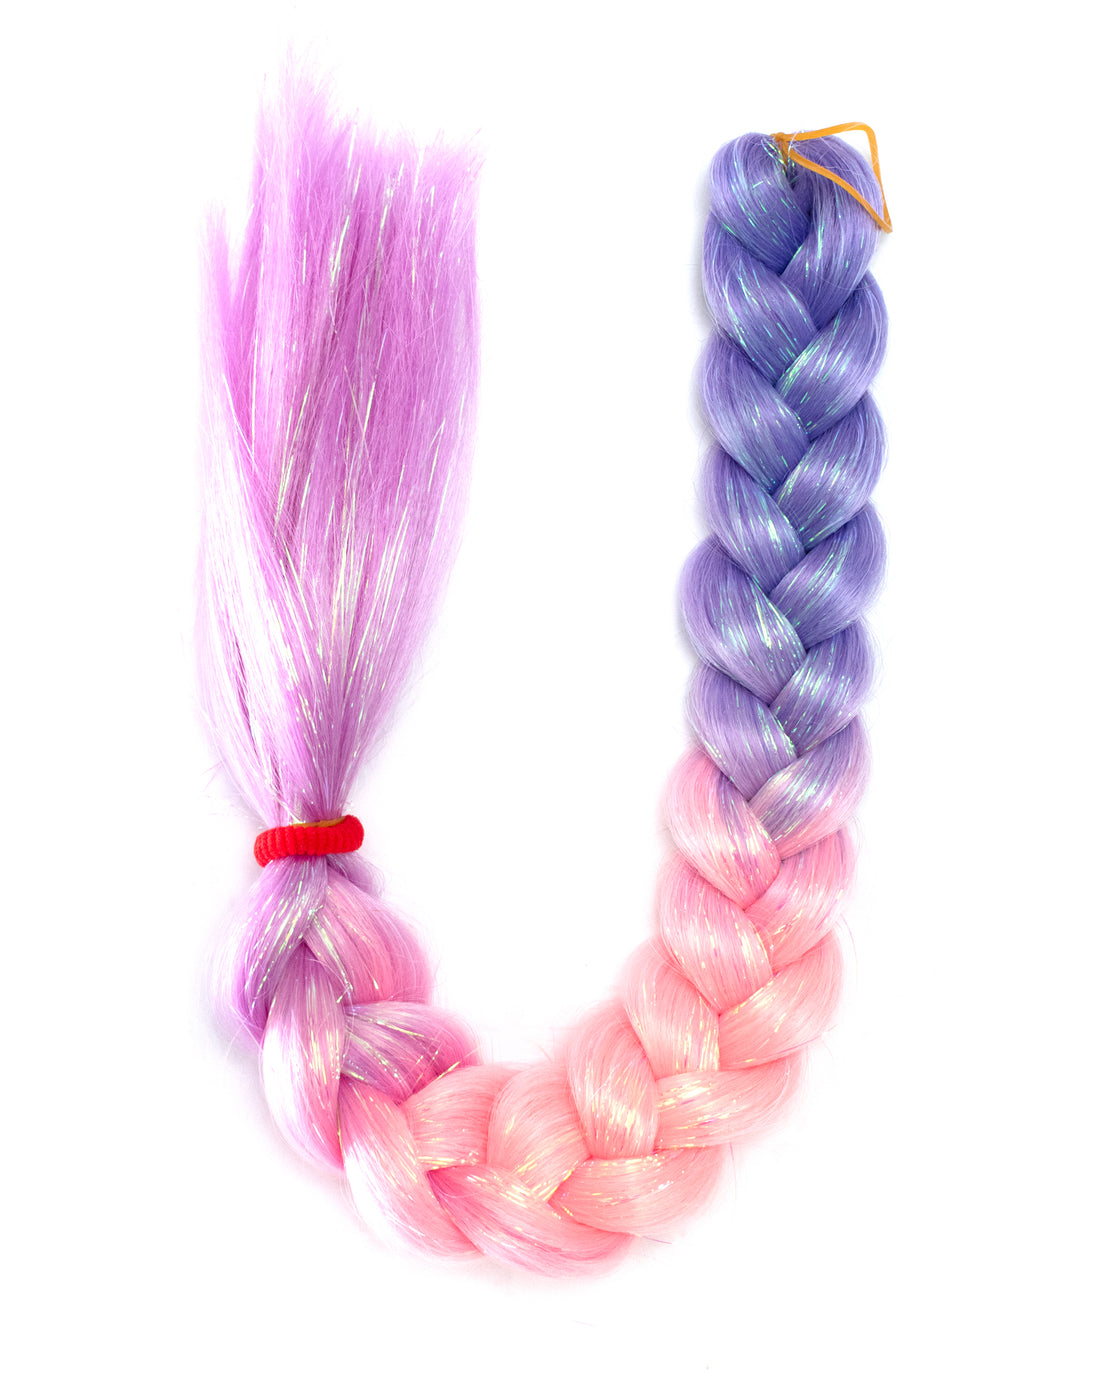 Paisley Pixie - Pastel Purple Pink Ombre Hair Extension with Tinsel